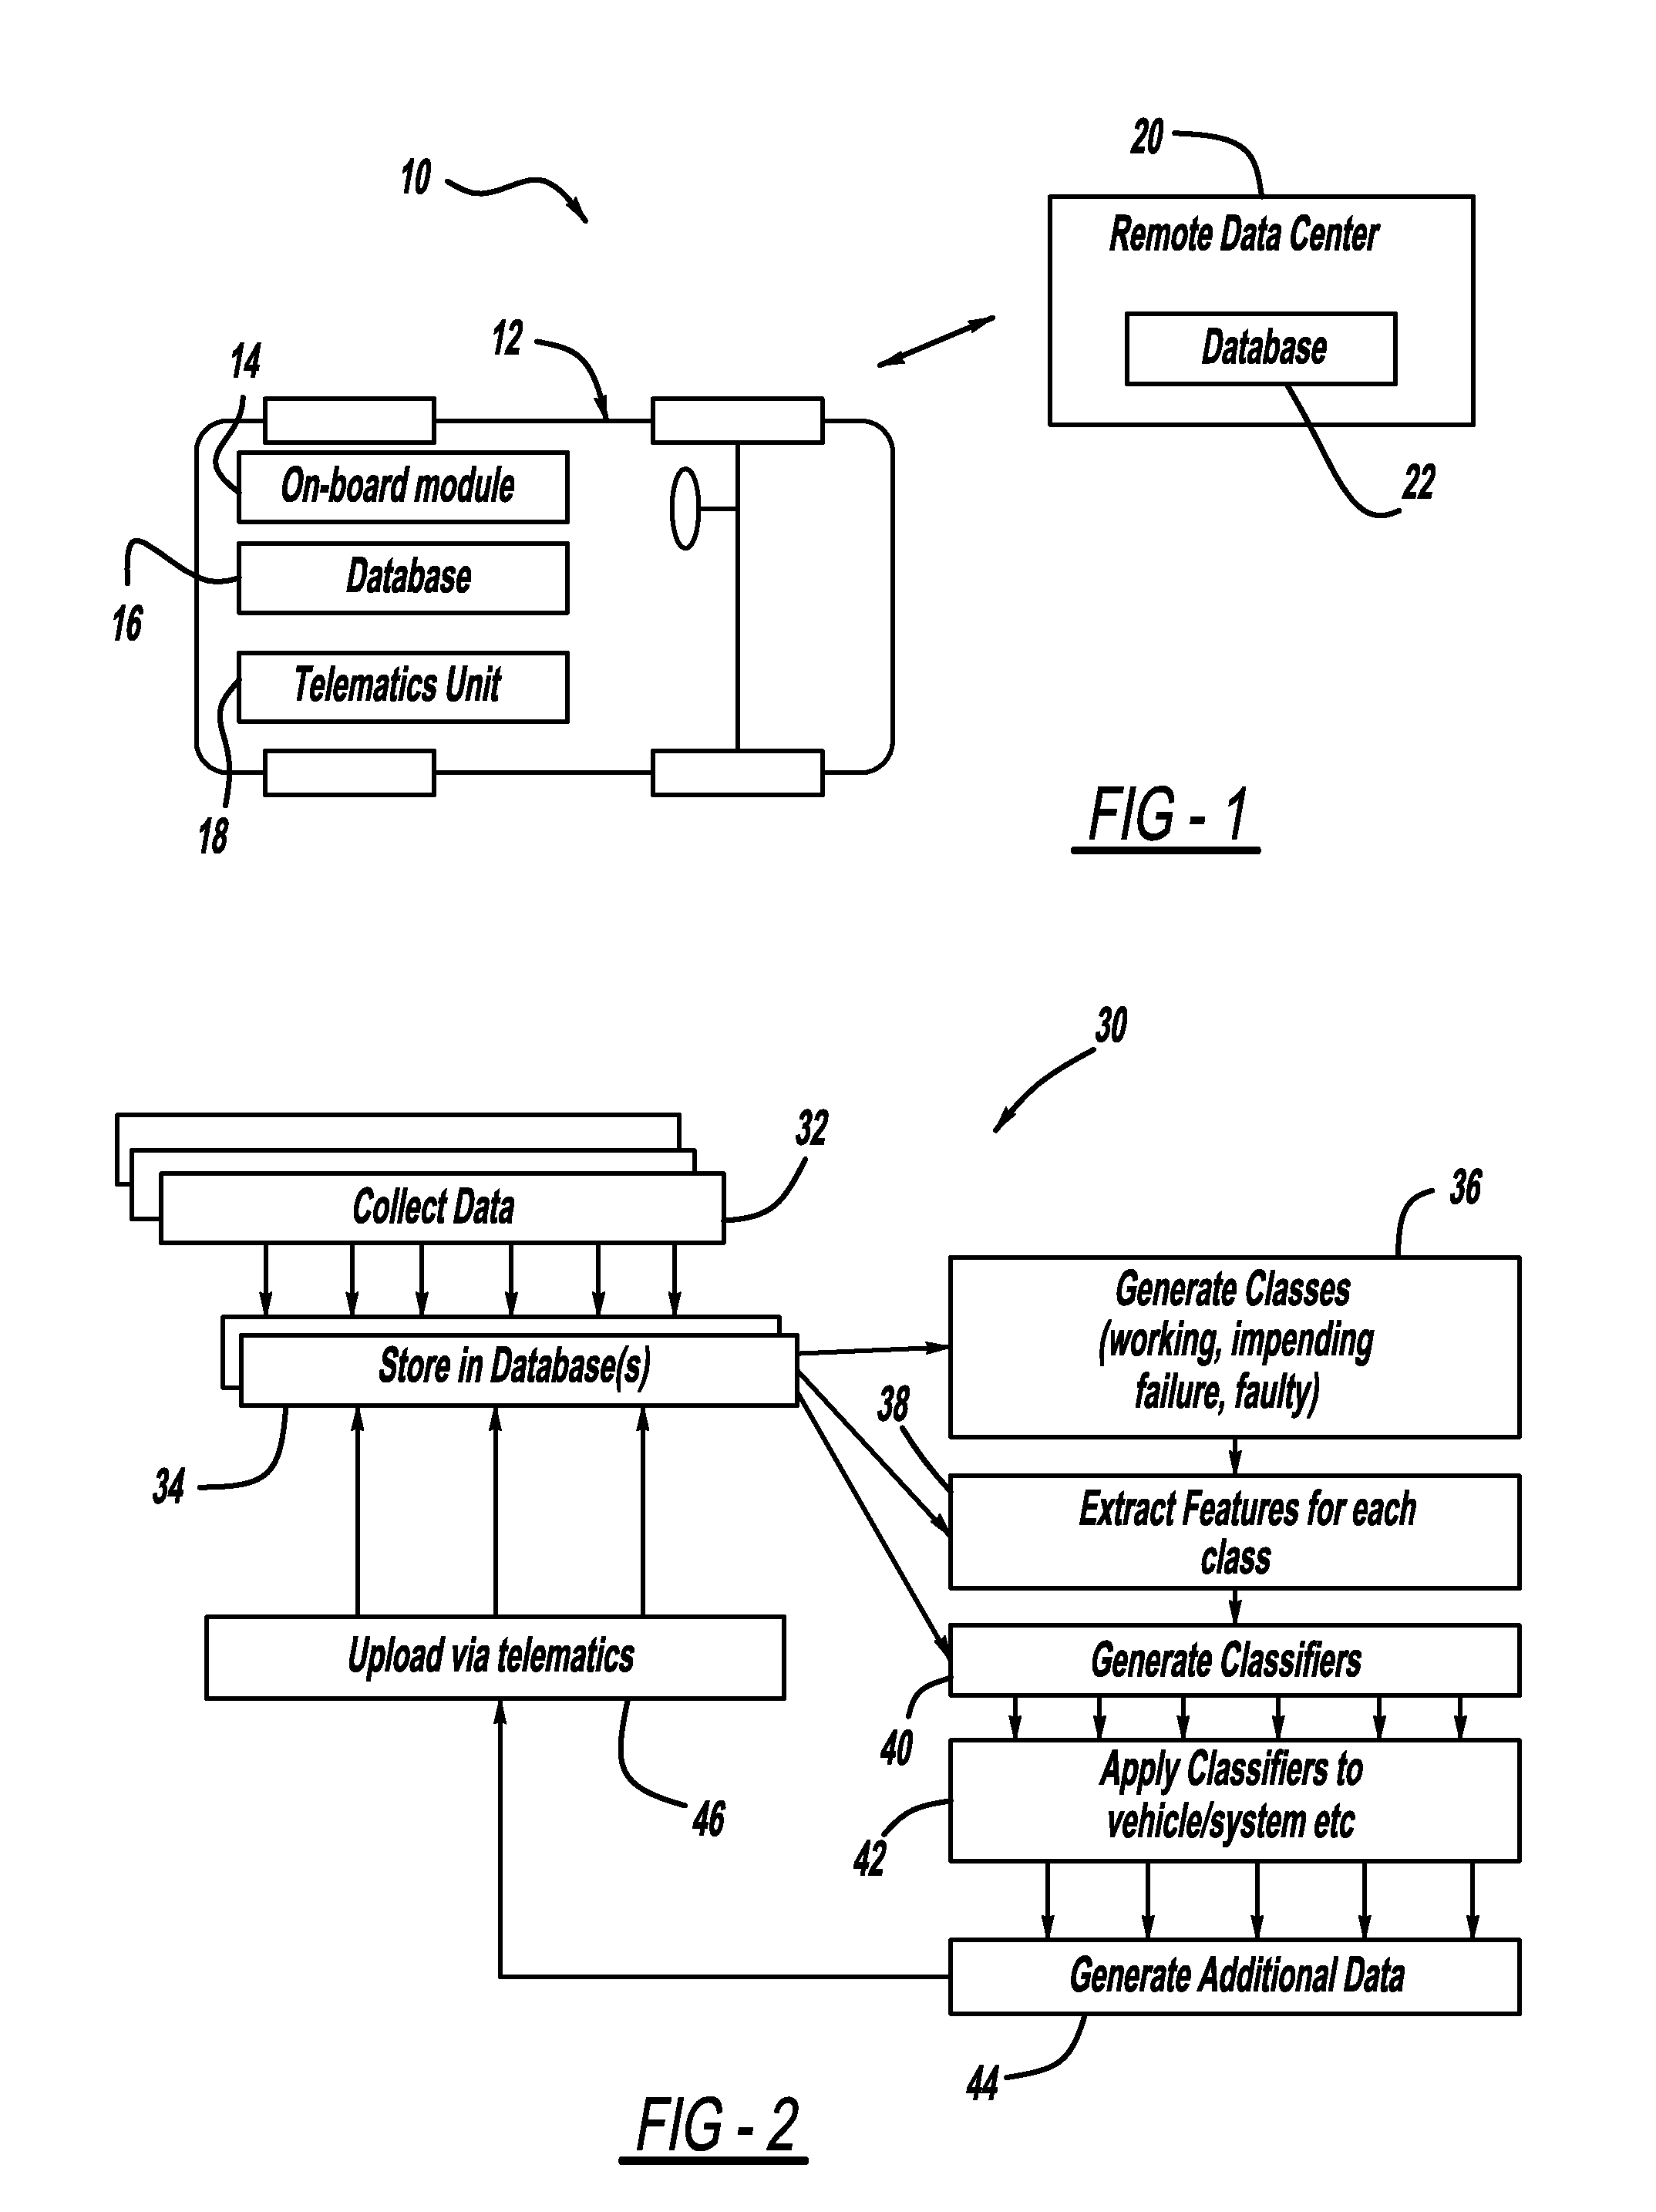 Aggregated information fusion for enhanced diagnostics, prognostics and maintenance practices of vehicles